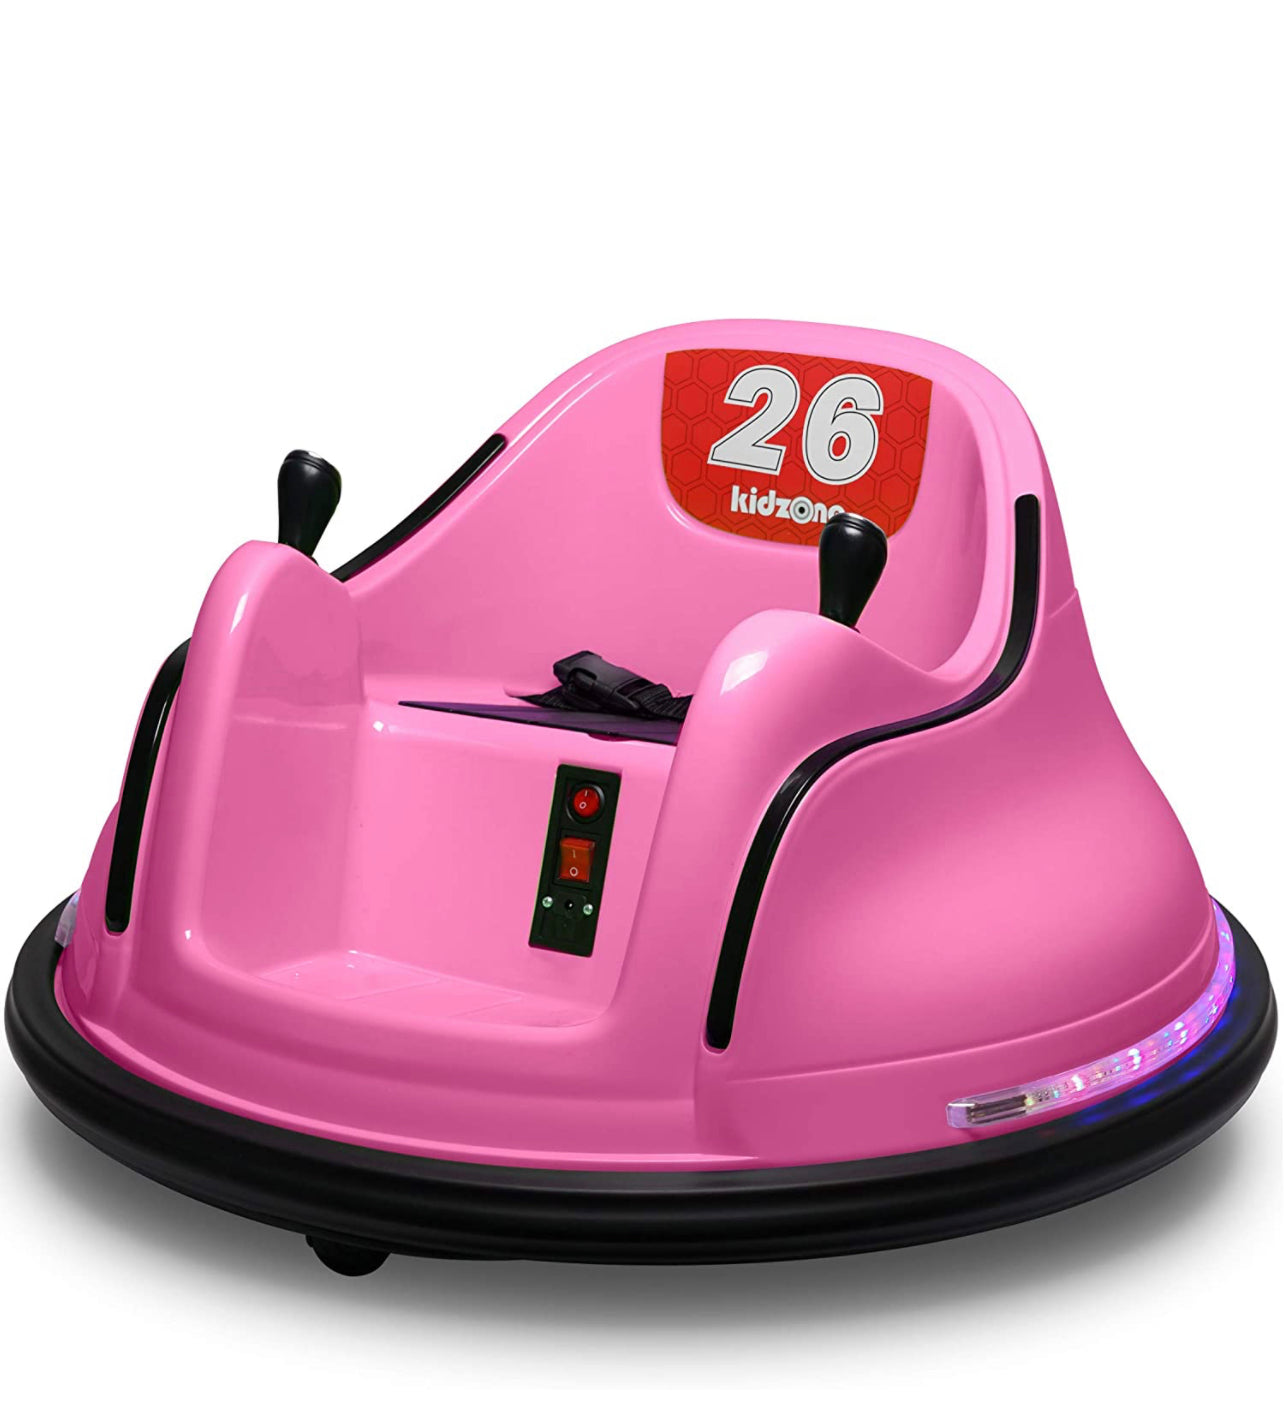 Toy Electric Ride On Bumper Car